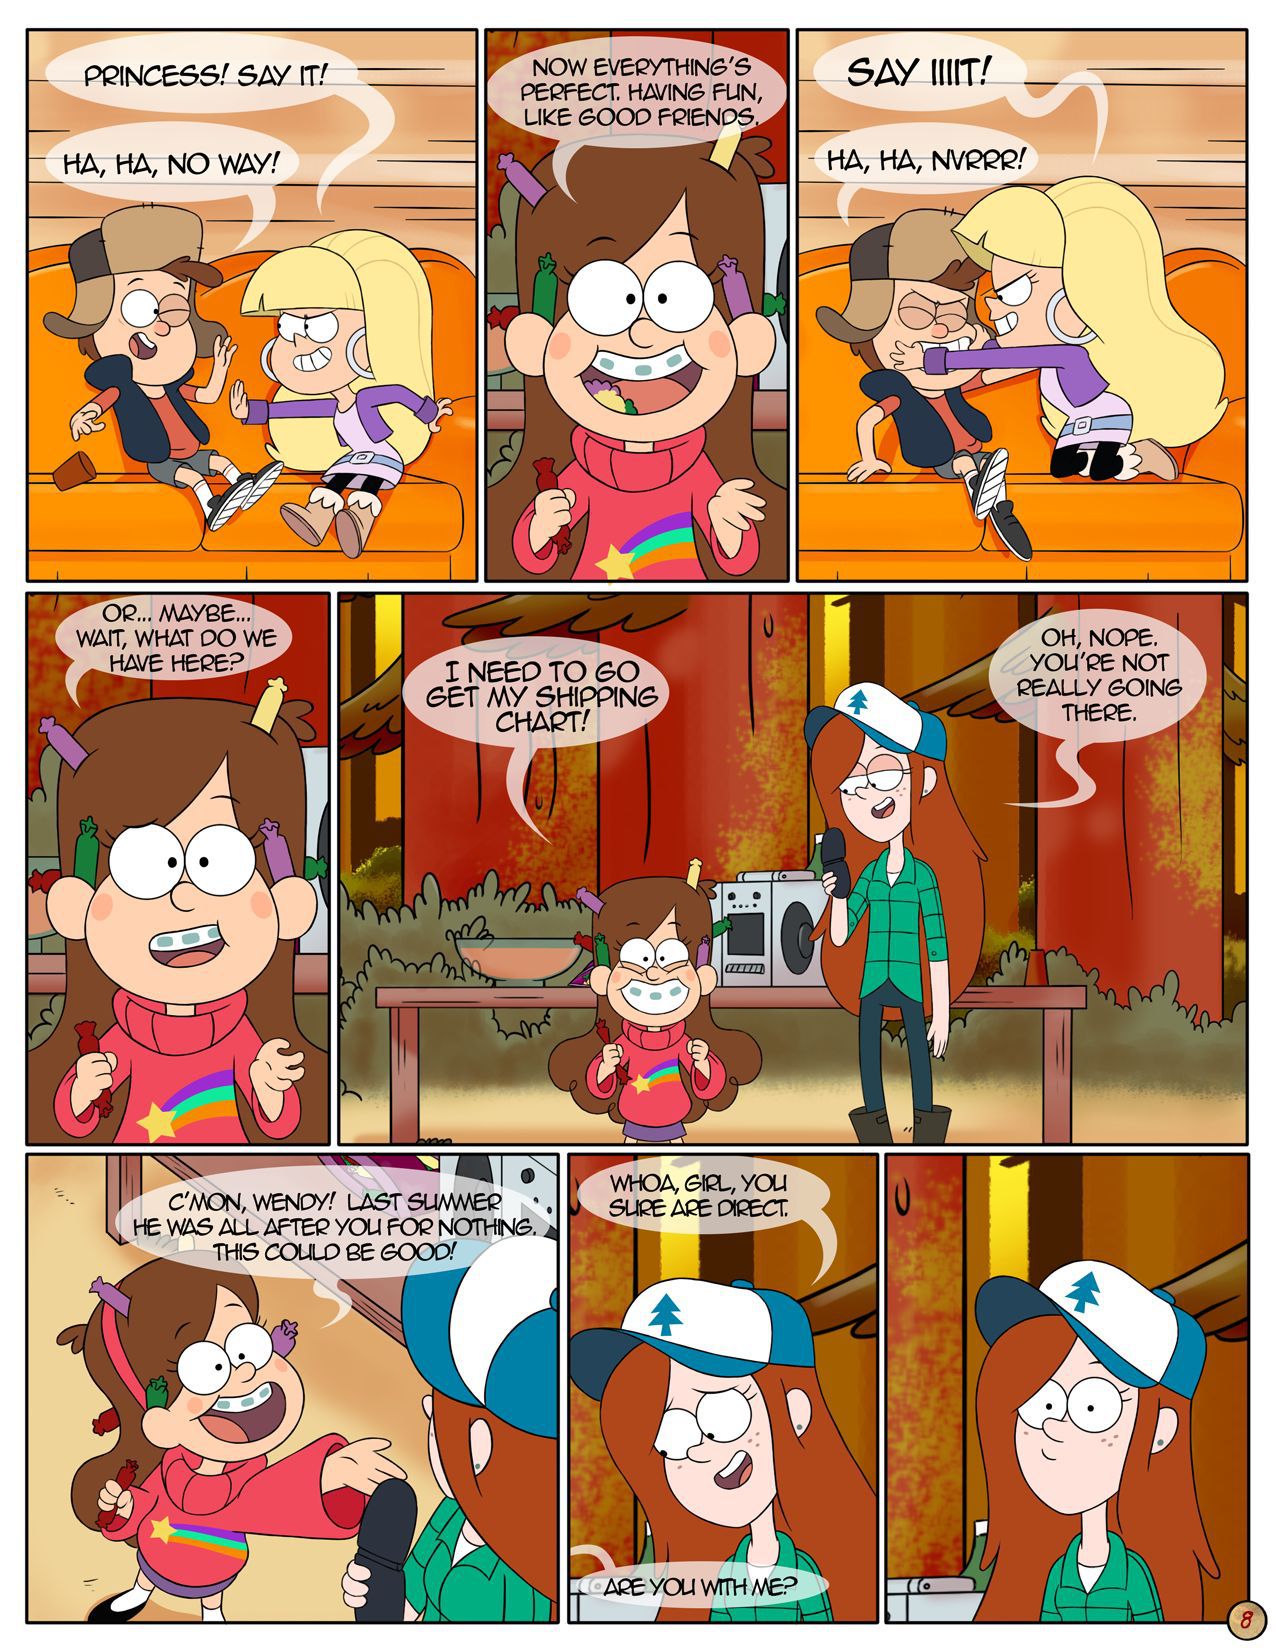 [Area] Next Summer (Gravity Falls) [Ongoing] 9